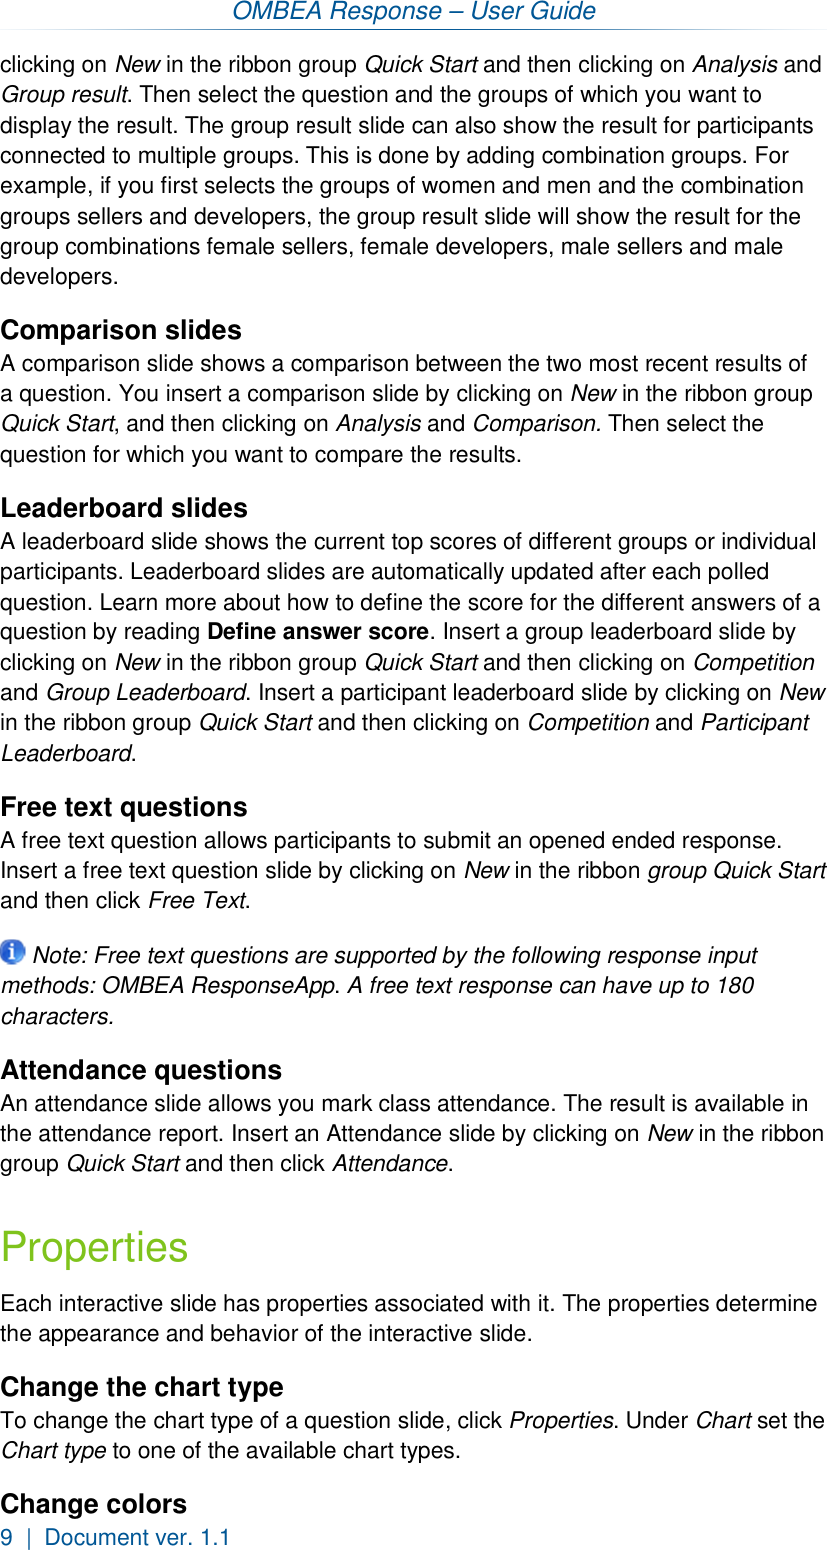 OMBEA Response – User Guide 9  |  Document ver. 1.1  clicking on New in the ribbon group Quick Start and then clicking on Analysis and Group result. Then select the question and the groups of which you want to display the result. The group result slide can also show the result for participants connected to multiple groups. This is done by adding combination groups. For example, if you first selects the groups of women and men and the combination groups sellers and developers, the group result slide will show the result for the group combinations female sellers, female developers, male sellers and male developers. Comparison slides A comparison slide shows a comparison between the two most recent results of a question. You insert a comparison slide by clicking on New in the ribbon group Quick Start, and then clicking on Analysis and Comparison. Then select the question for which you want to compare the results. Leaderboard slides A leaderboard slide shows the current top scores of different groups or individual participants. Leaderboard slides are automatically updated after each polled question. Learn more about how to define the score for the different answers of a question by reading Define answer score. Insert a group leaderboard slide by clicking on New in the ribbon group Quick Start and then clicking on Competition and Group Leaderboard. Insert a participant leaderboard slide by clicking on New in the ribbon group Quick Start and then clicking on Competition and Participant Leaderboard. Free text questions A free text question allows participants to submit an opened ended response. Insert a free text question slide by clicking on New in the ribbon group Quick Start and then click Free Text.  Note: Free text questions are supported by the following response input methods: OMBEA ResponseApp. A free text response can have up to 180 characters. Attendance questions An attendance slide allows you mark class attendance. The result is available in the attendance report. Insert an Attendance slide by clicking on New in the ribbon group Quick Start and then click Attendance. Properties Each interactive slide has properties associated with it. The properties determine the appearance and behavior of the interactive slide. Change the chart type To change the chart type of a question slide, click Properties. Under Chart set the Chart type to one of the available chart types. Change colors 